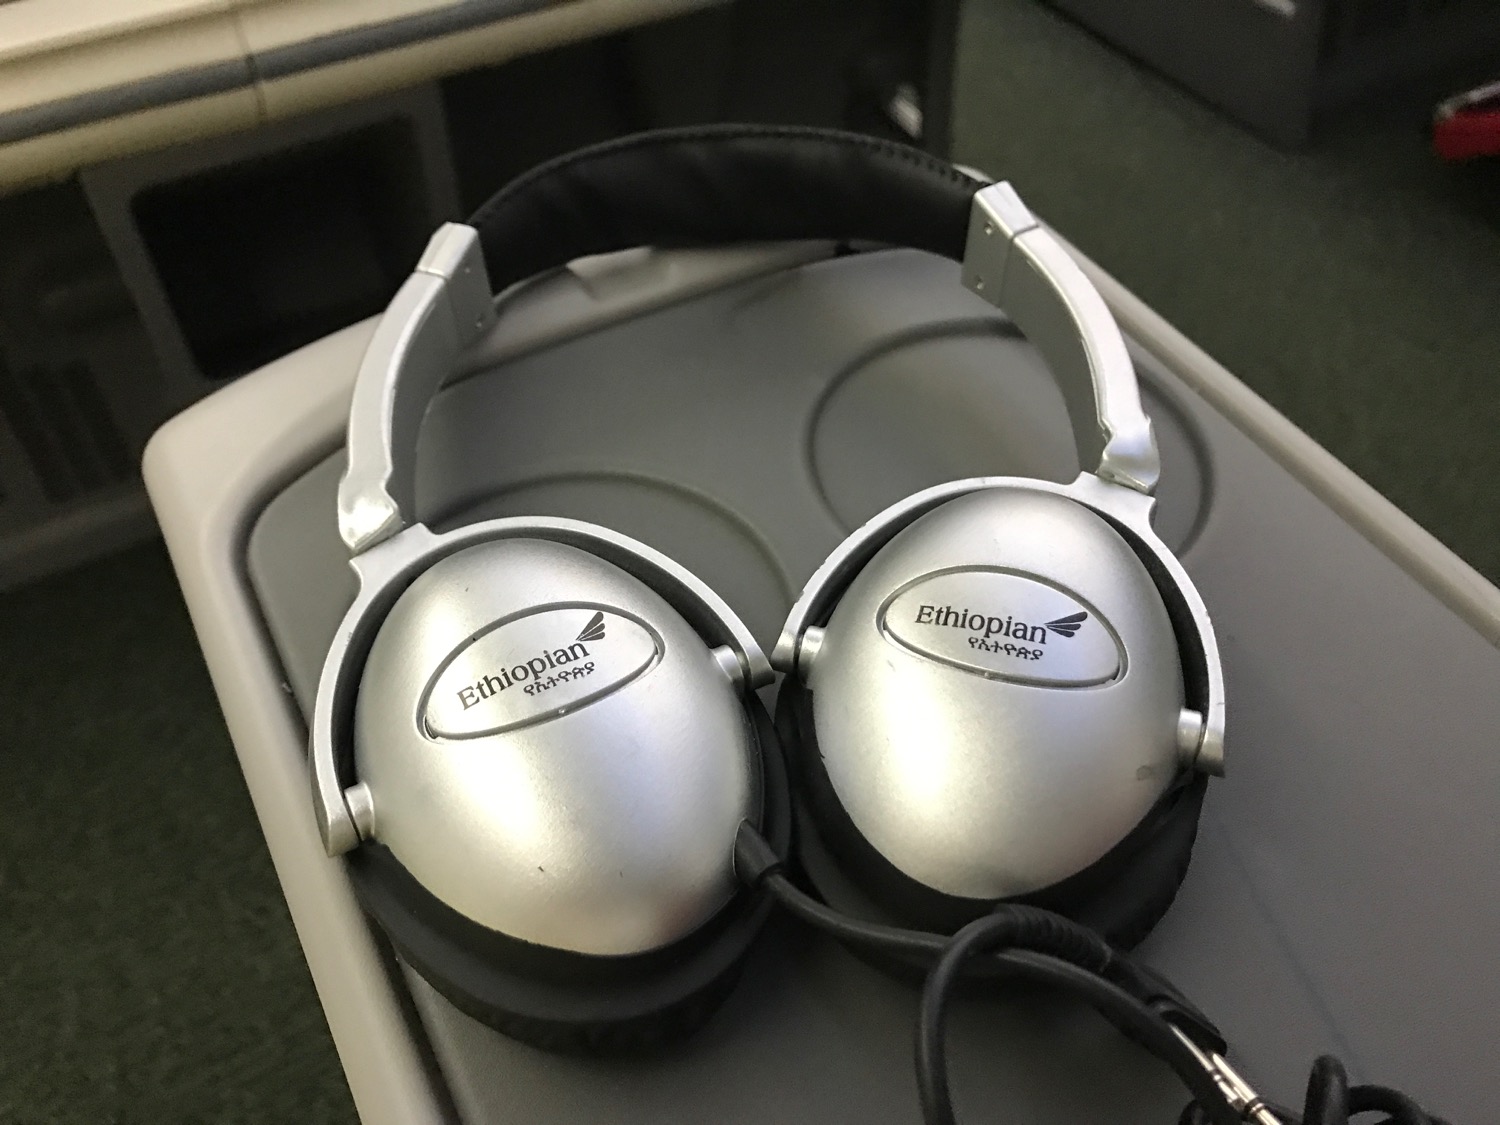 a pair of headphones on a tray